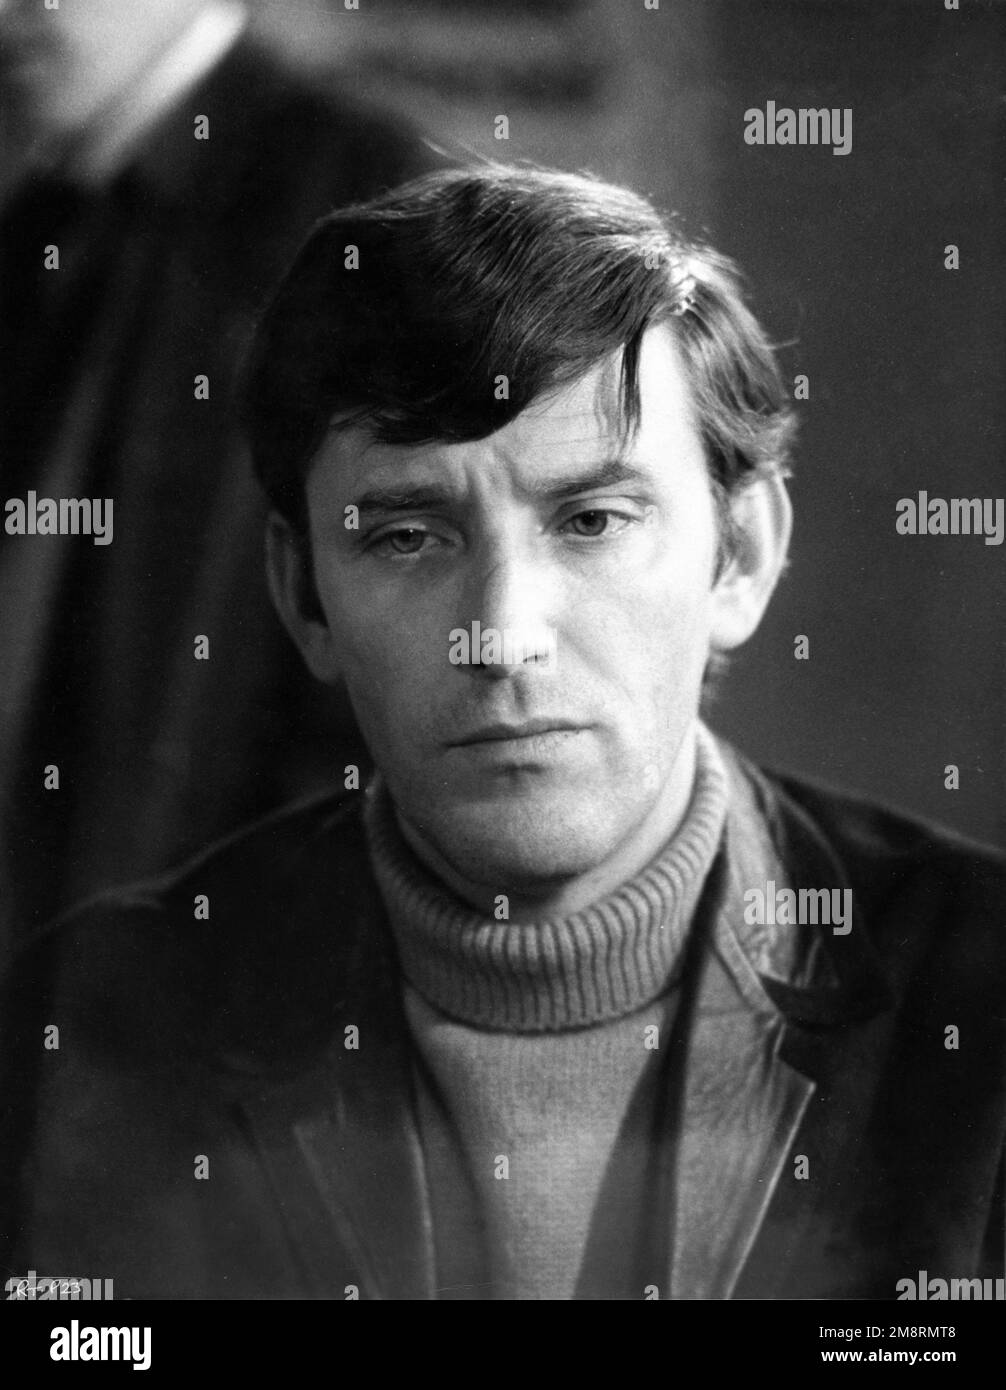 TOM BELL portrait in HE WHO RIDES A TIGER 1965 director CHARLES CRICHTON writer Trevor Peacock David Newman productions / British Lion Film Corporation Stock Photo